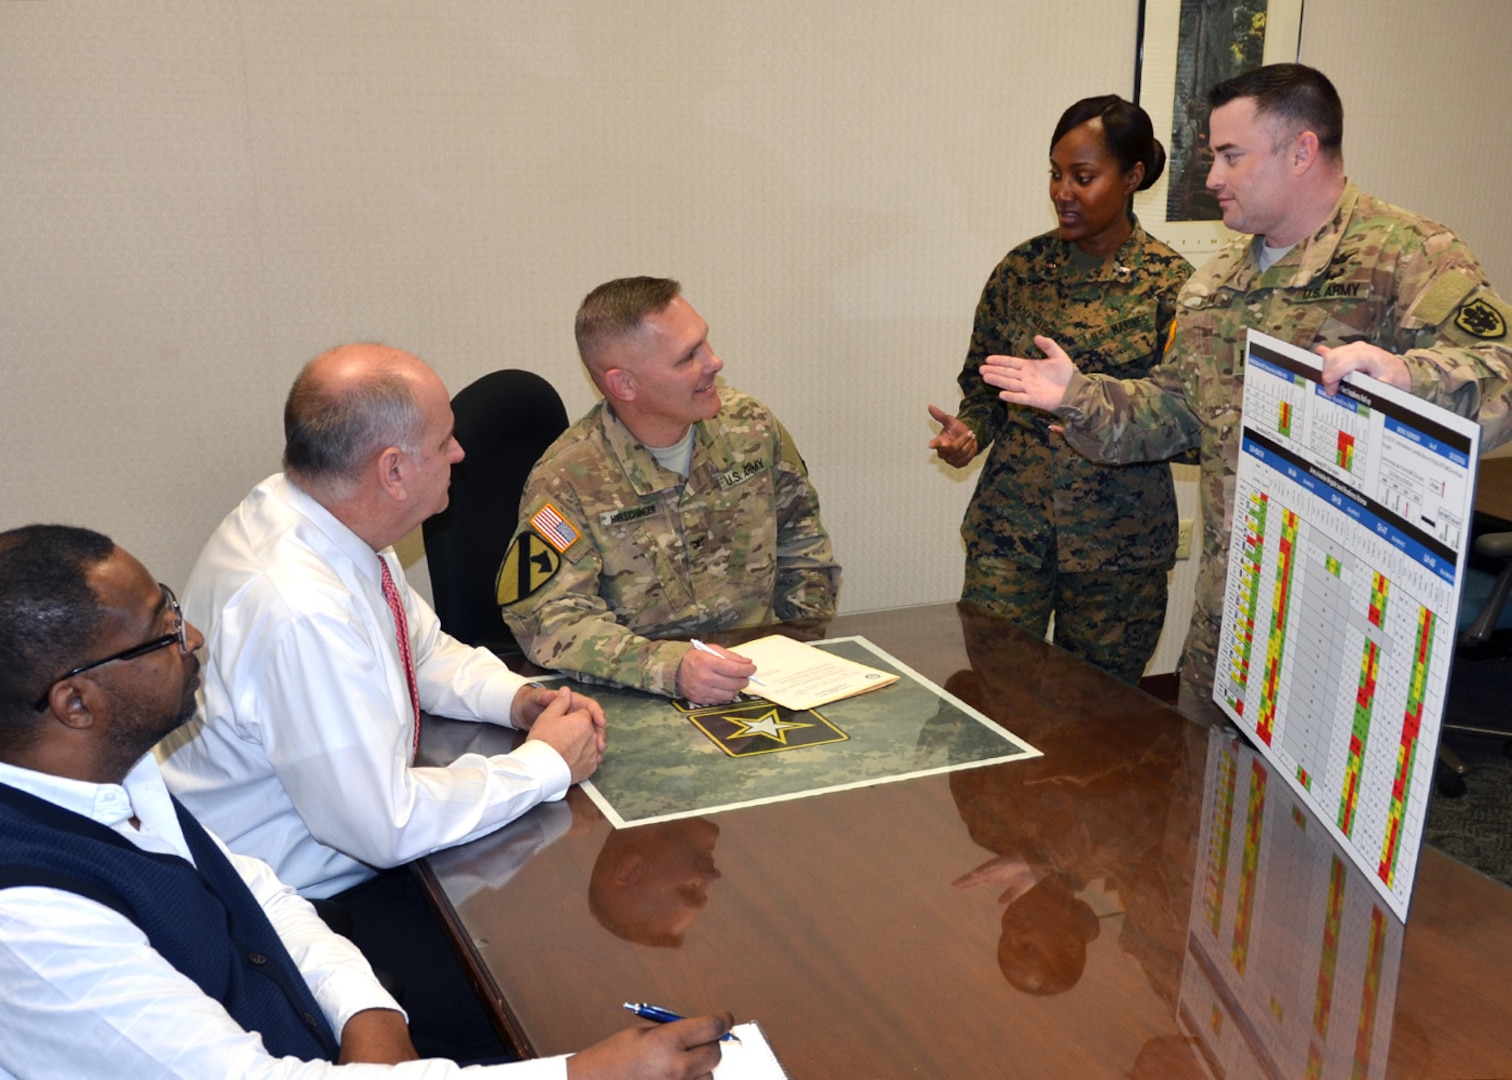 From right: Army Chief Warrant Officer 4 Kevin Ryan and Marine Corps Chief Warrant Officer 3 Jacqueline Elazier-Allison brief Army Col. Mark Hirschinger, Craig Hughes and George Johnson, the chief, deputy division chief and force provider, respectively, of DLA Aviation’s Army Customer Facing Division, on aviation metrics at Defense Supply Center, Richmond, Virginia. 